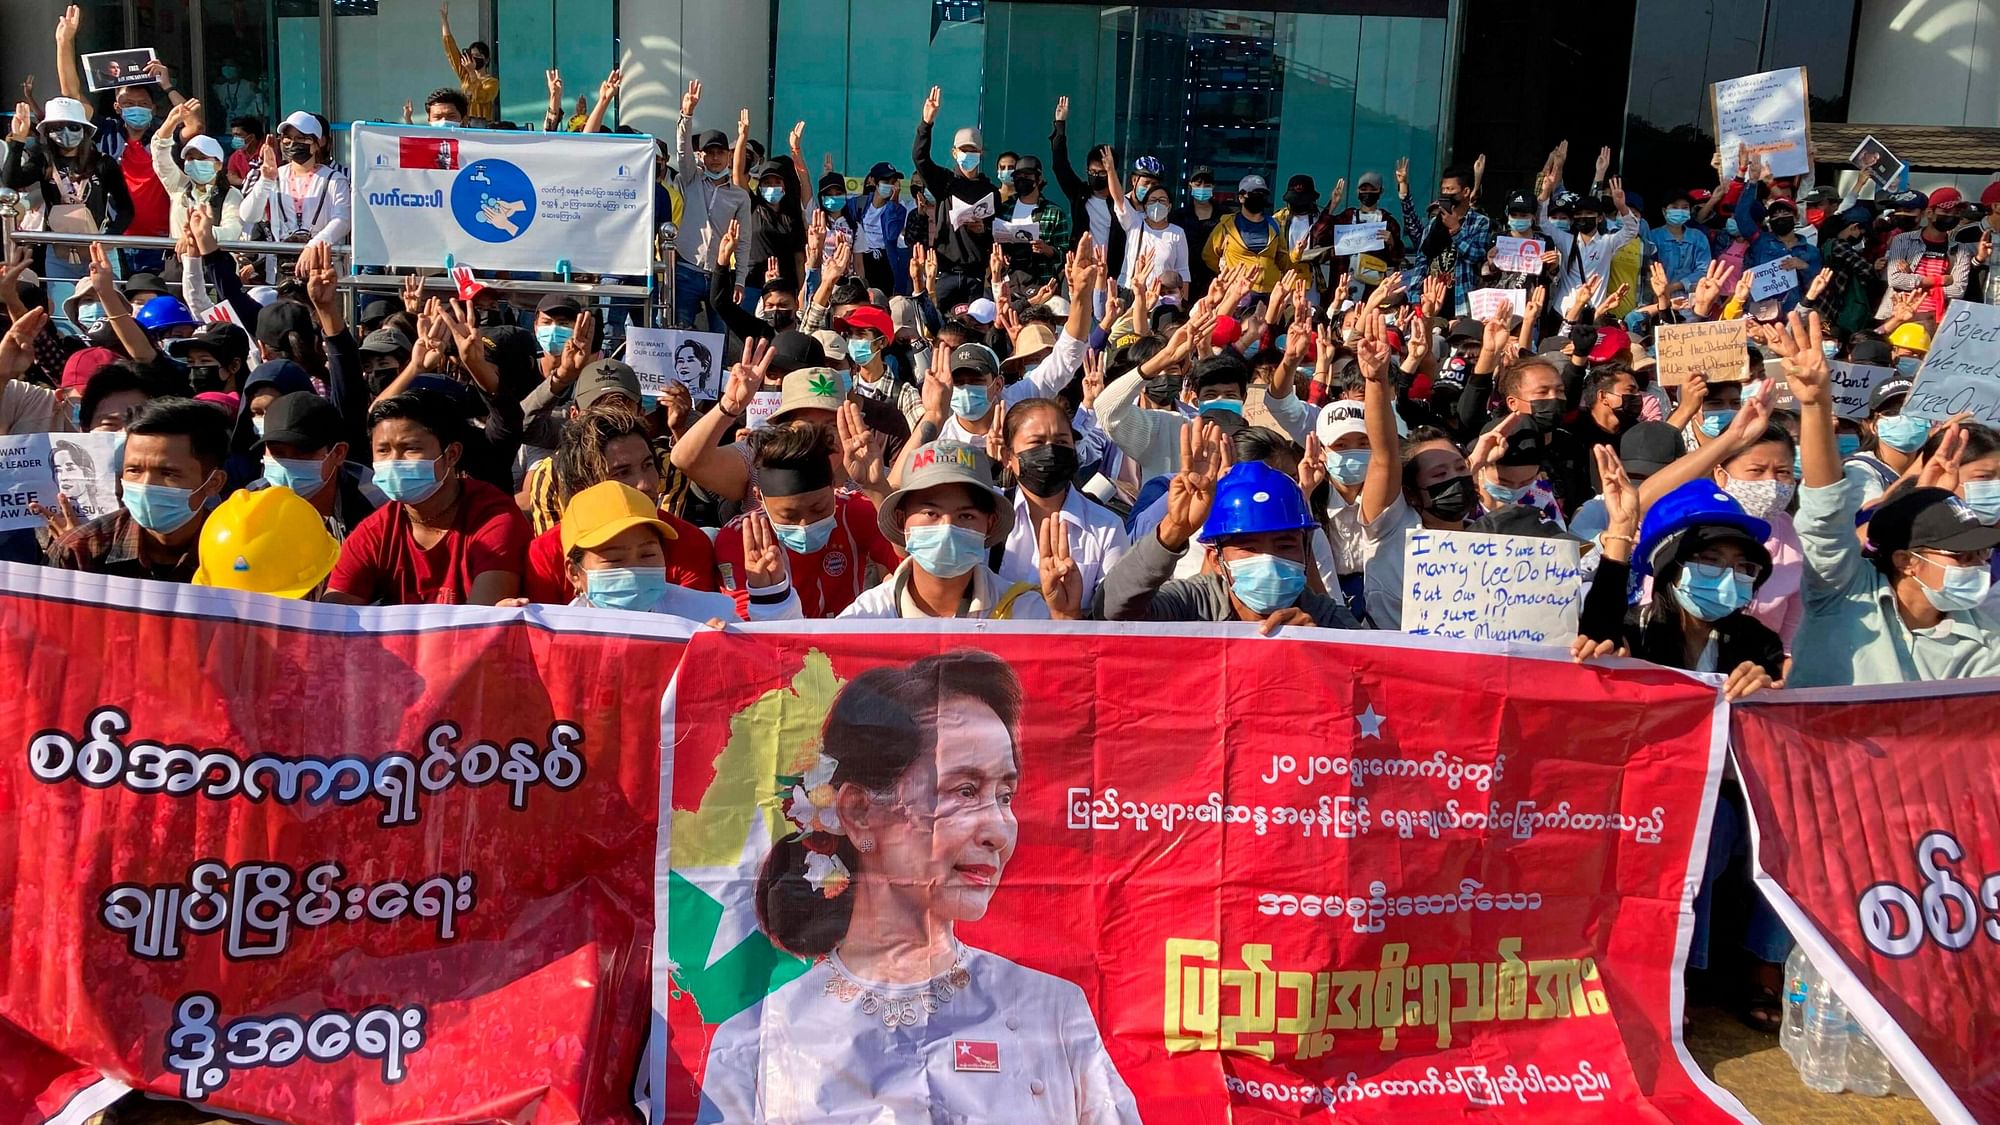 Demonstrators display three-fingered salute, a symbol of resistance at an intersection in Yangon, Myanmar Wednesday, 10 February 2021.&nbsp;